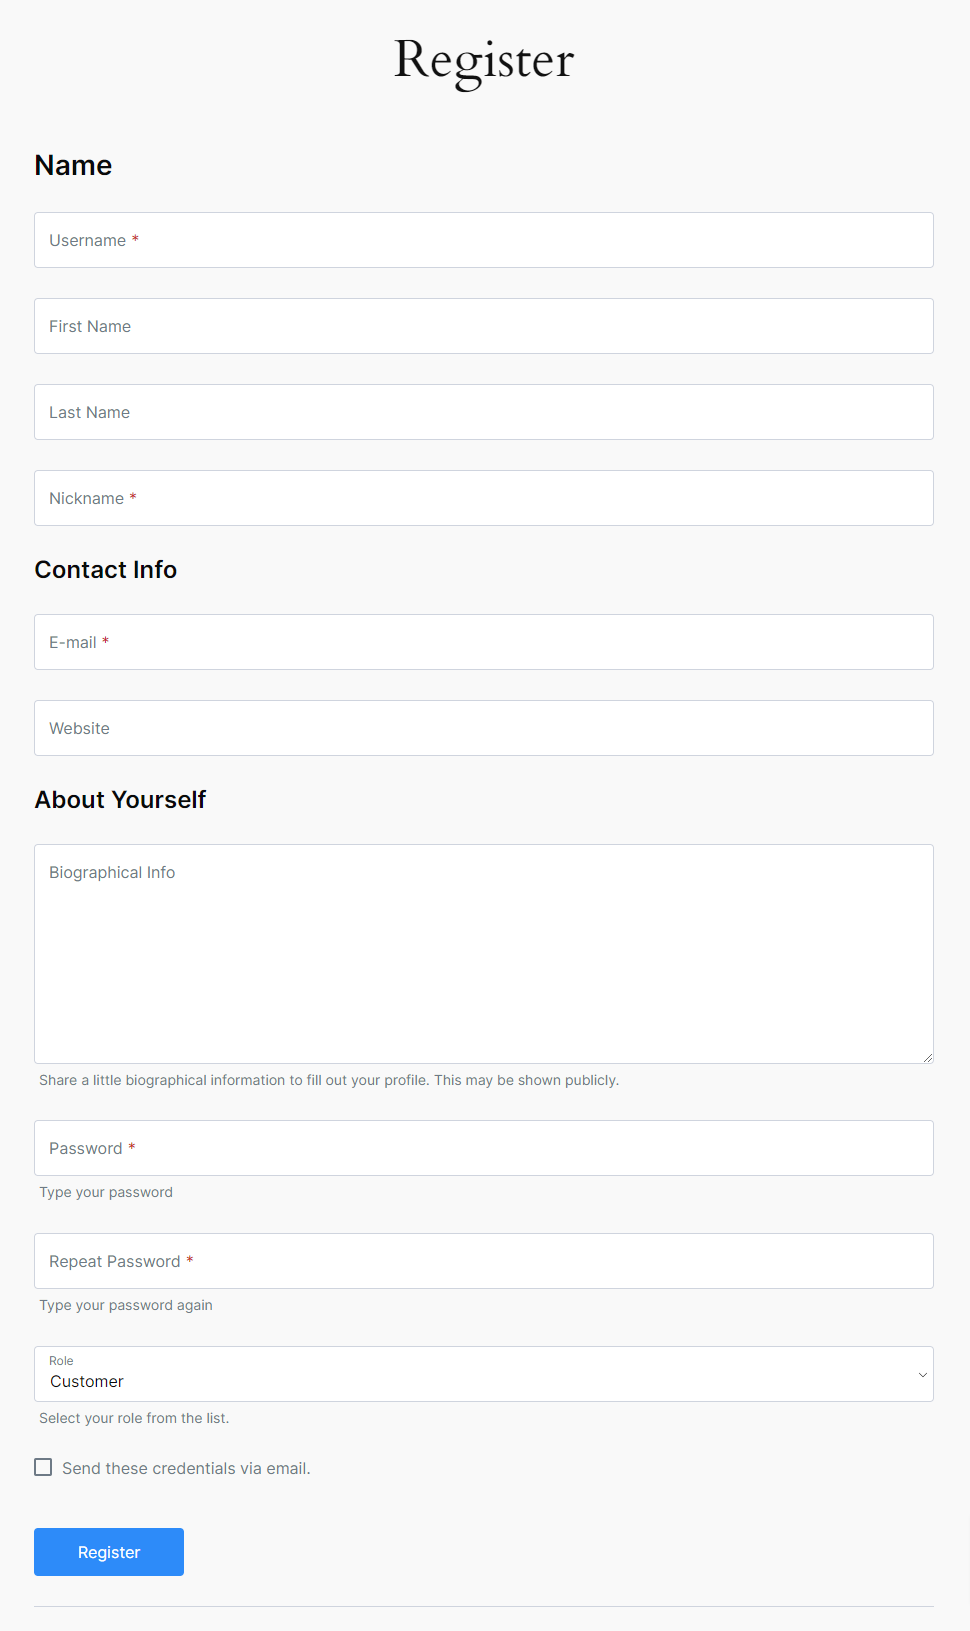 Profile Builder - Select (User Role) Field Front-End